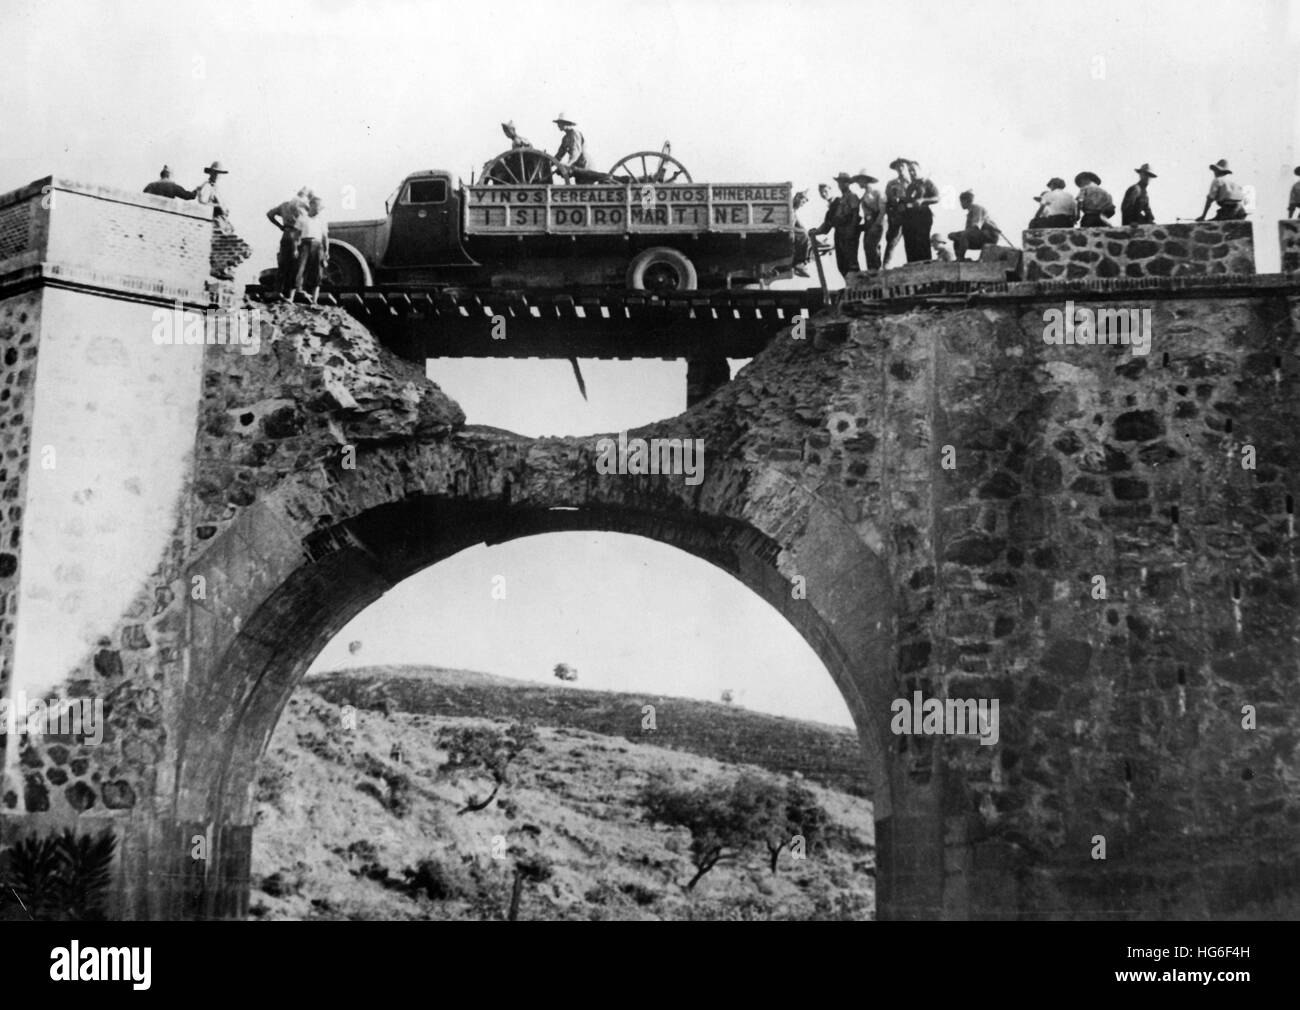 The Nazi propaganda picture shows the reconstruction of a destroyed bridge by Francos troops during the Spanish Civil War in Spain, 20 September 1936. Fotoarchiv für Zeitgeschichtee - NO WIRE SERVICE - | usage worldwide Stock Photo